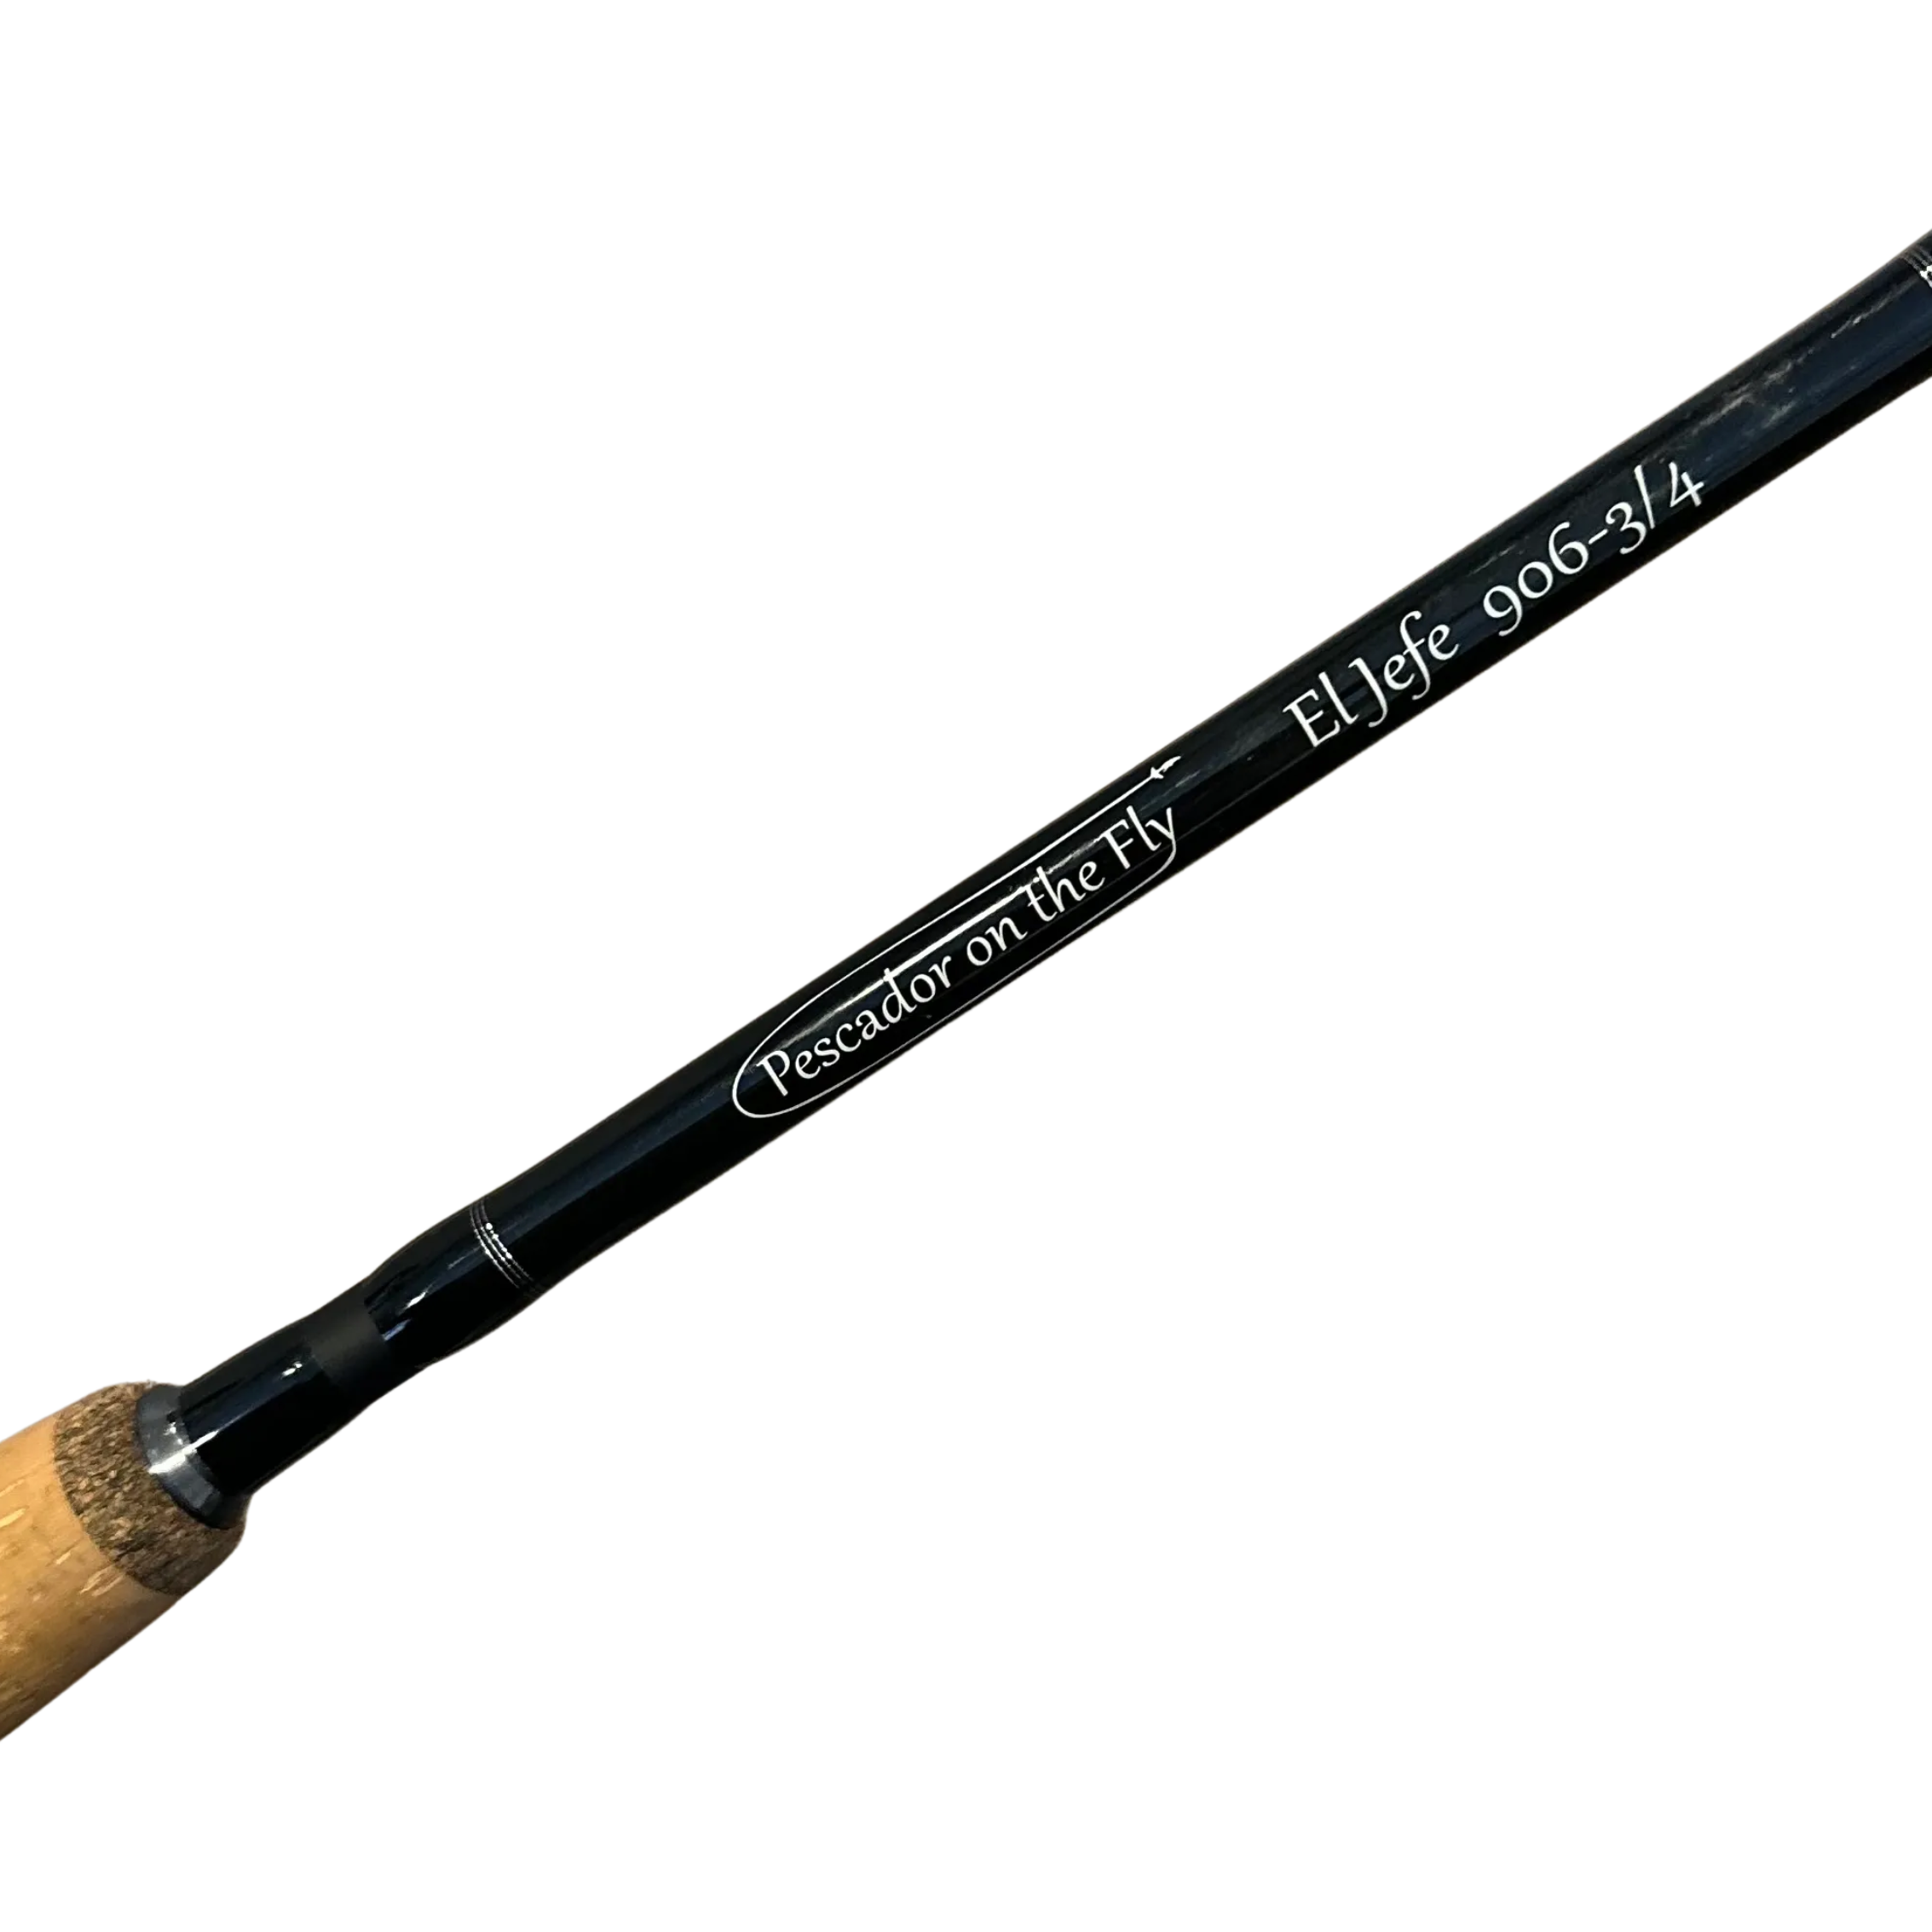 El Jefe Fly Fishing Combo Package | 906-3 | 9' Six Section 3 Weight Fly Rod And Reel Outfit